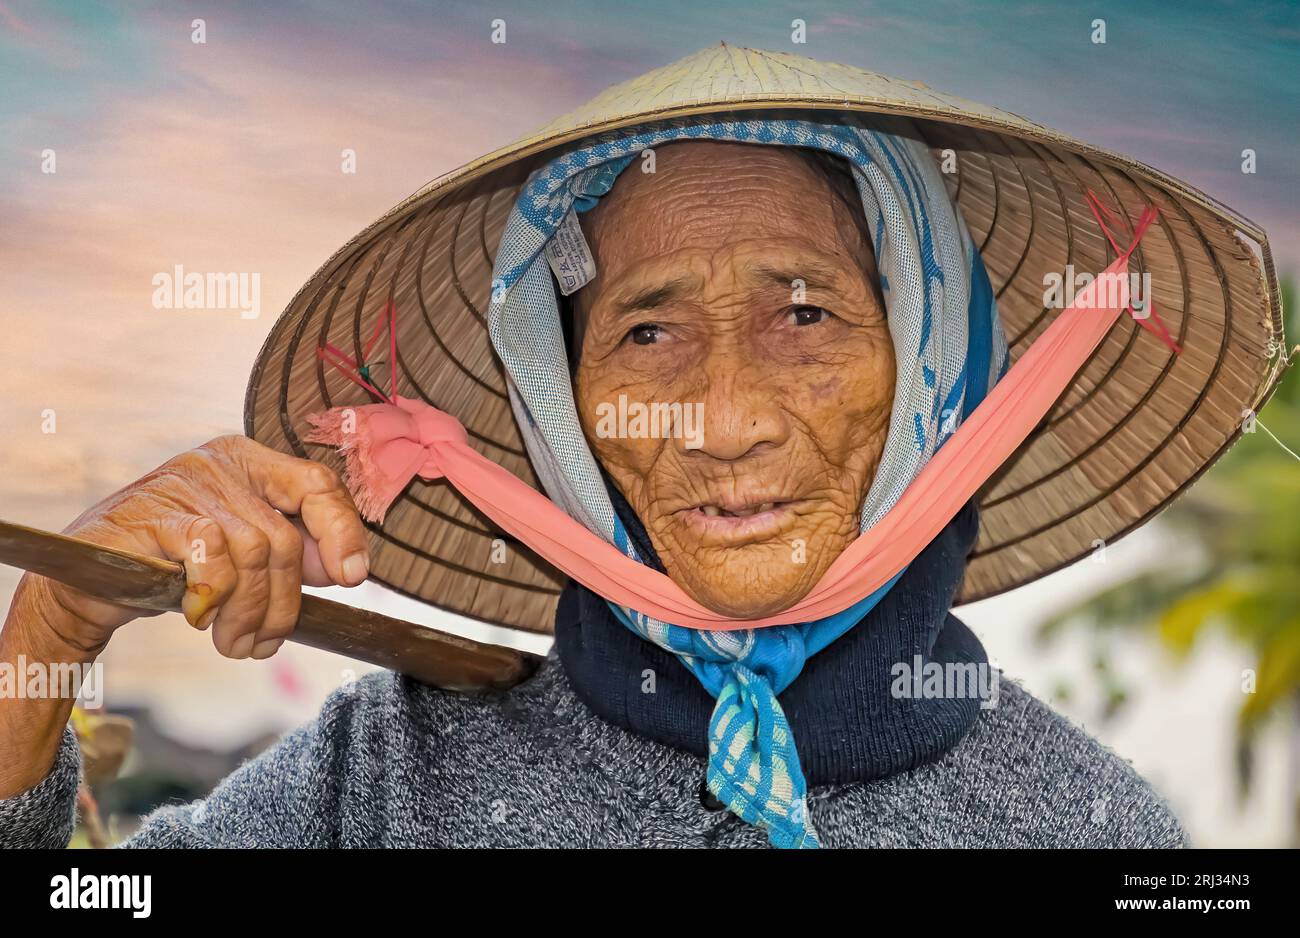 Hoi-An, Vietnam - December 9. 2014: Portrait of old mature poor vietnamese farmer woman, sun tanned wrinkled face,  traditional cone hat carrying heav Stock Photo